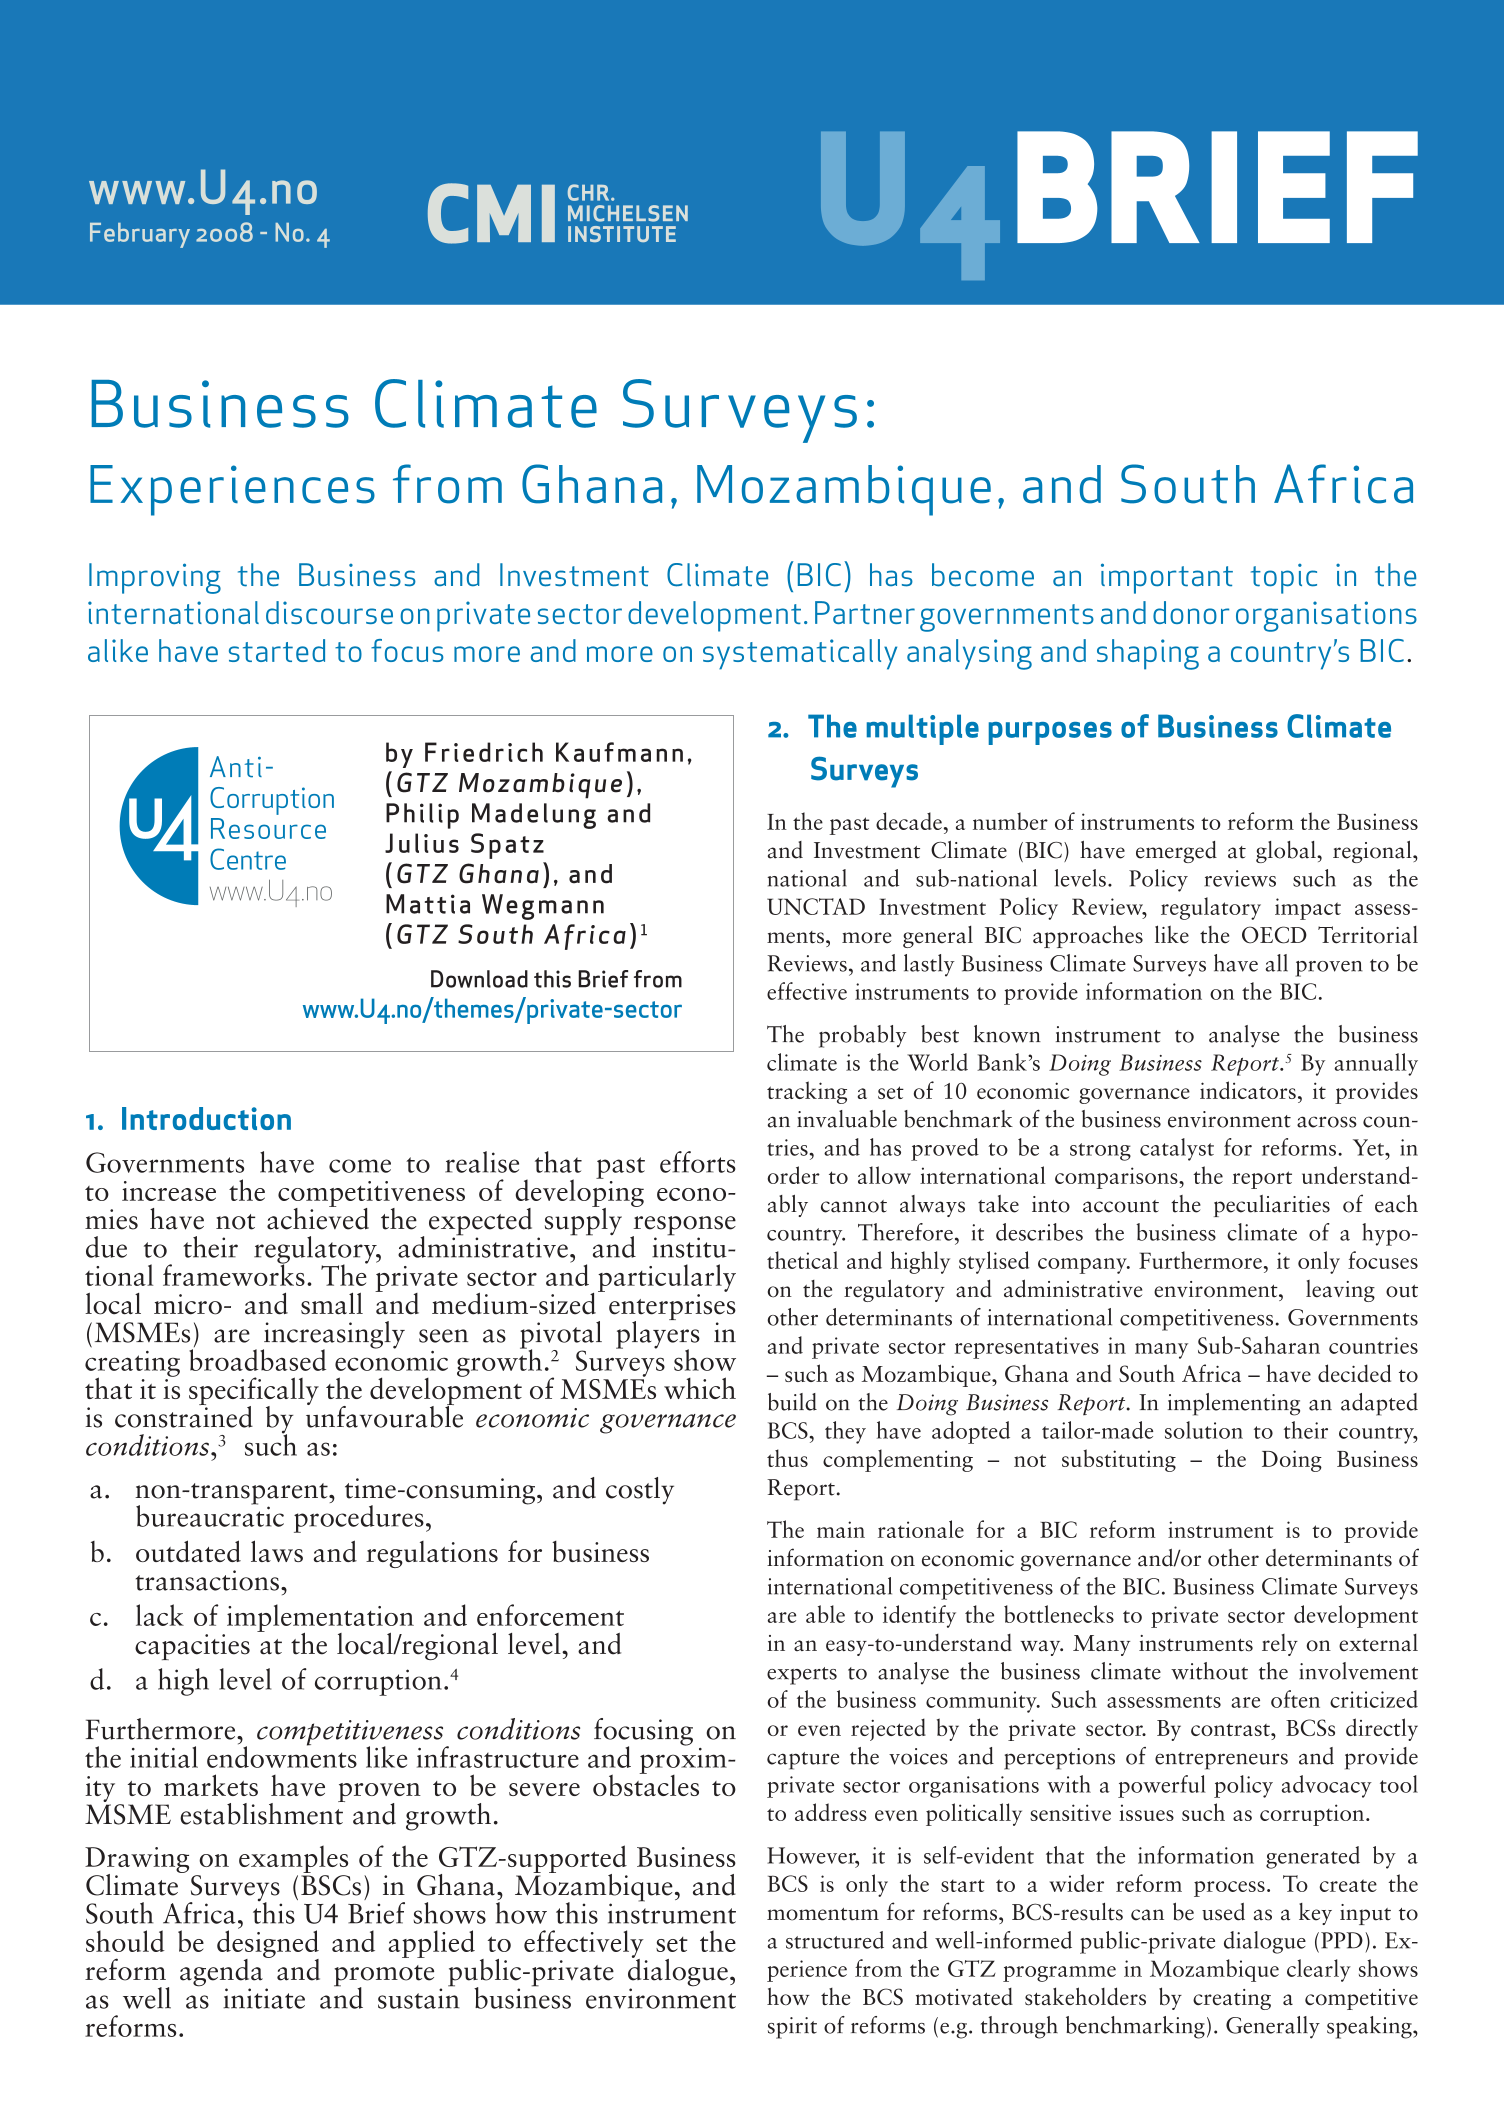 Business Climate Surveys: Experiences from Ghana, Mozambique, and South Africa